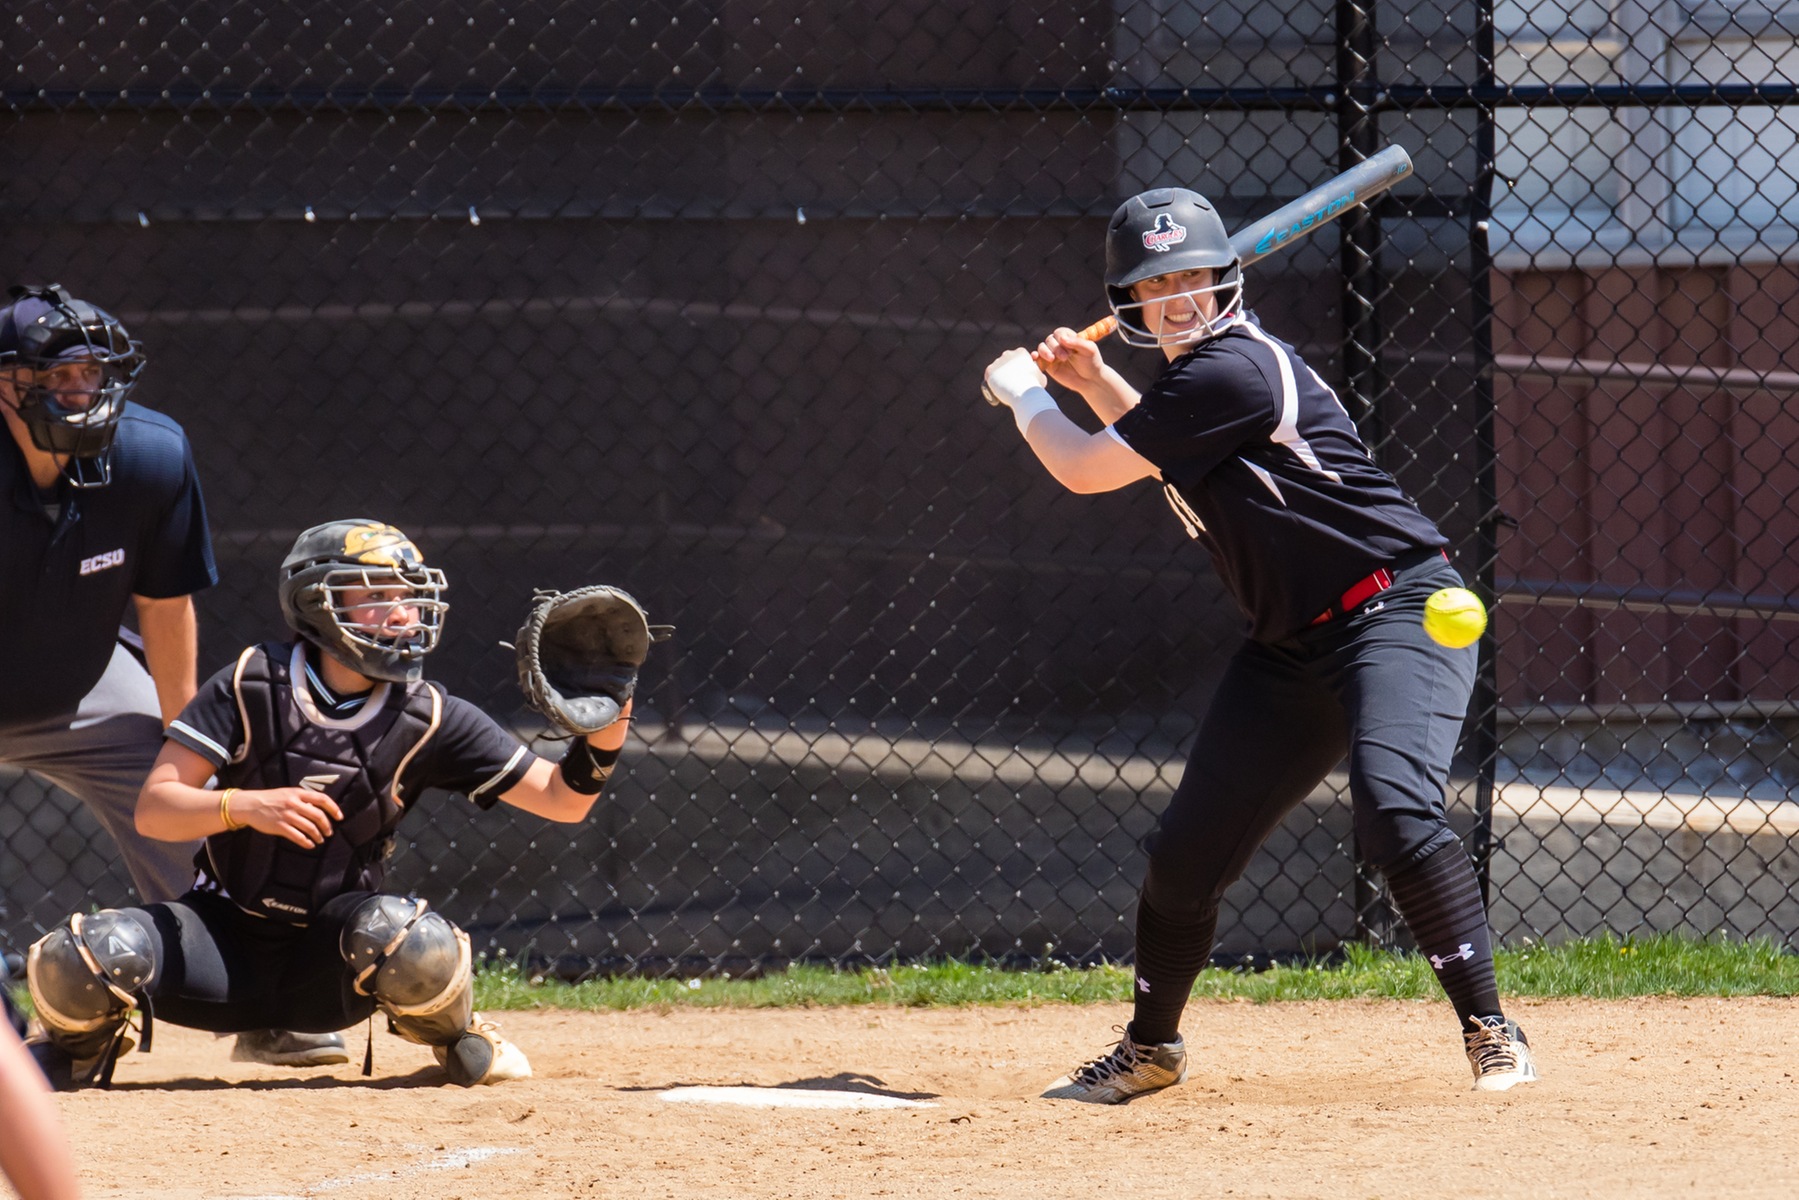 Dominican swept a non-conference double-header from host St. Thomas Aquinas College.